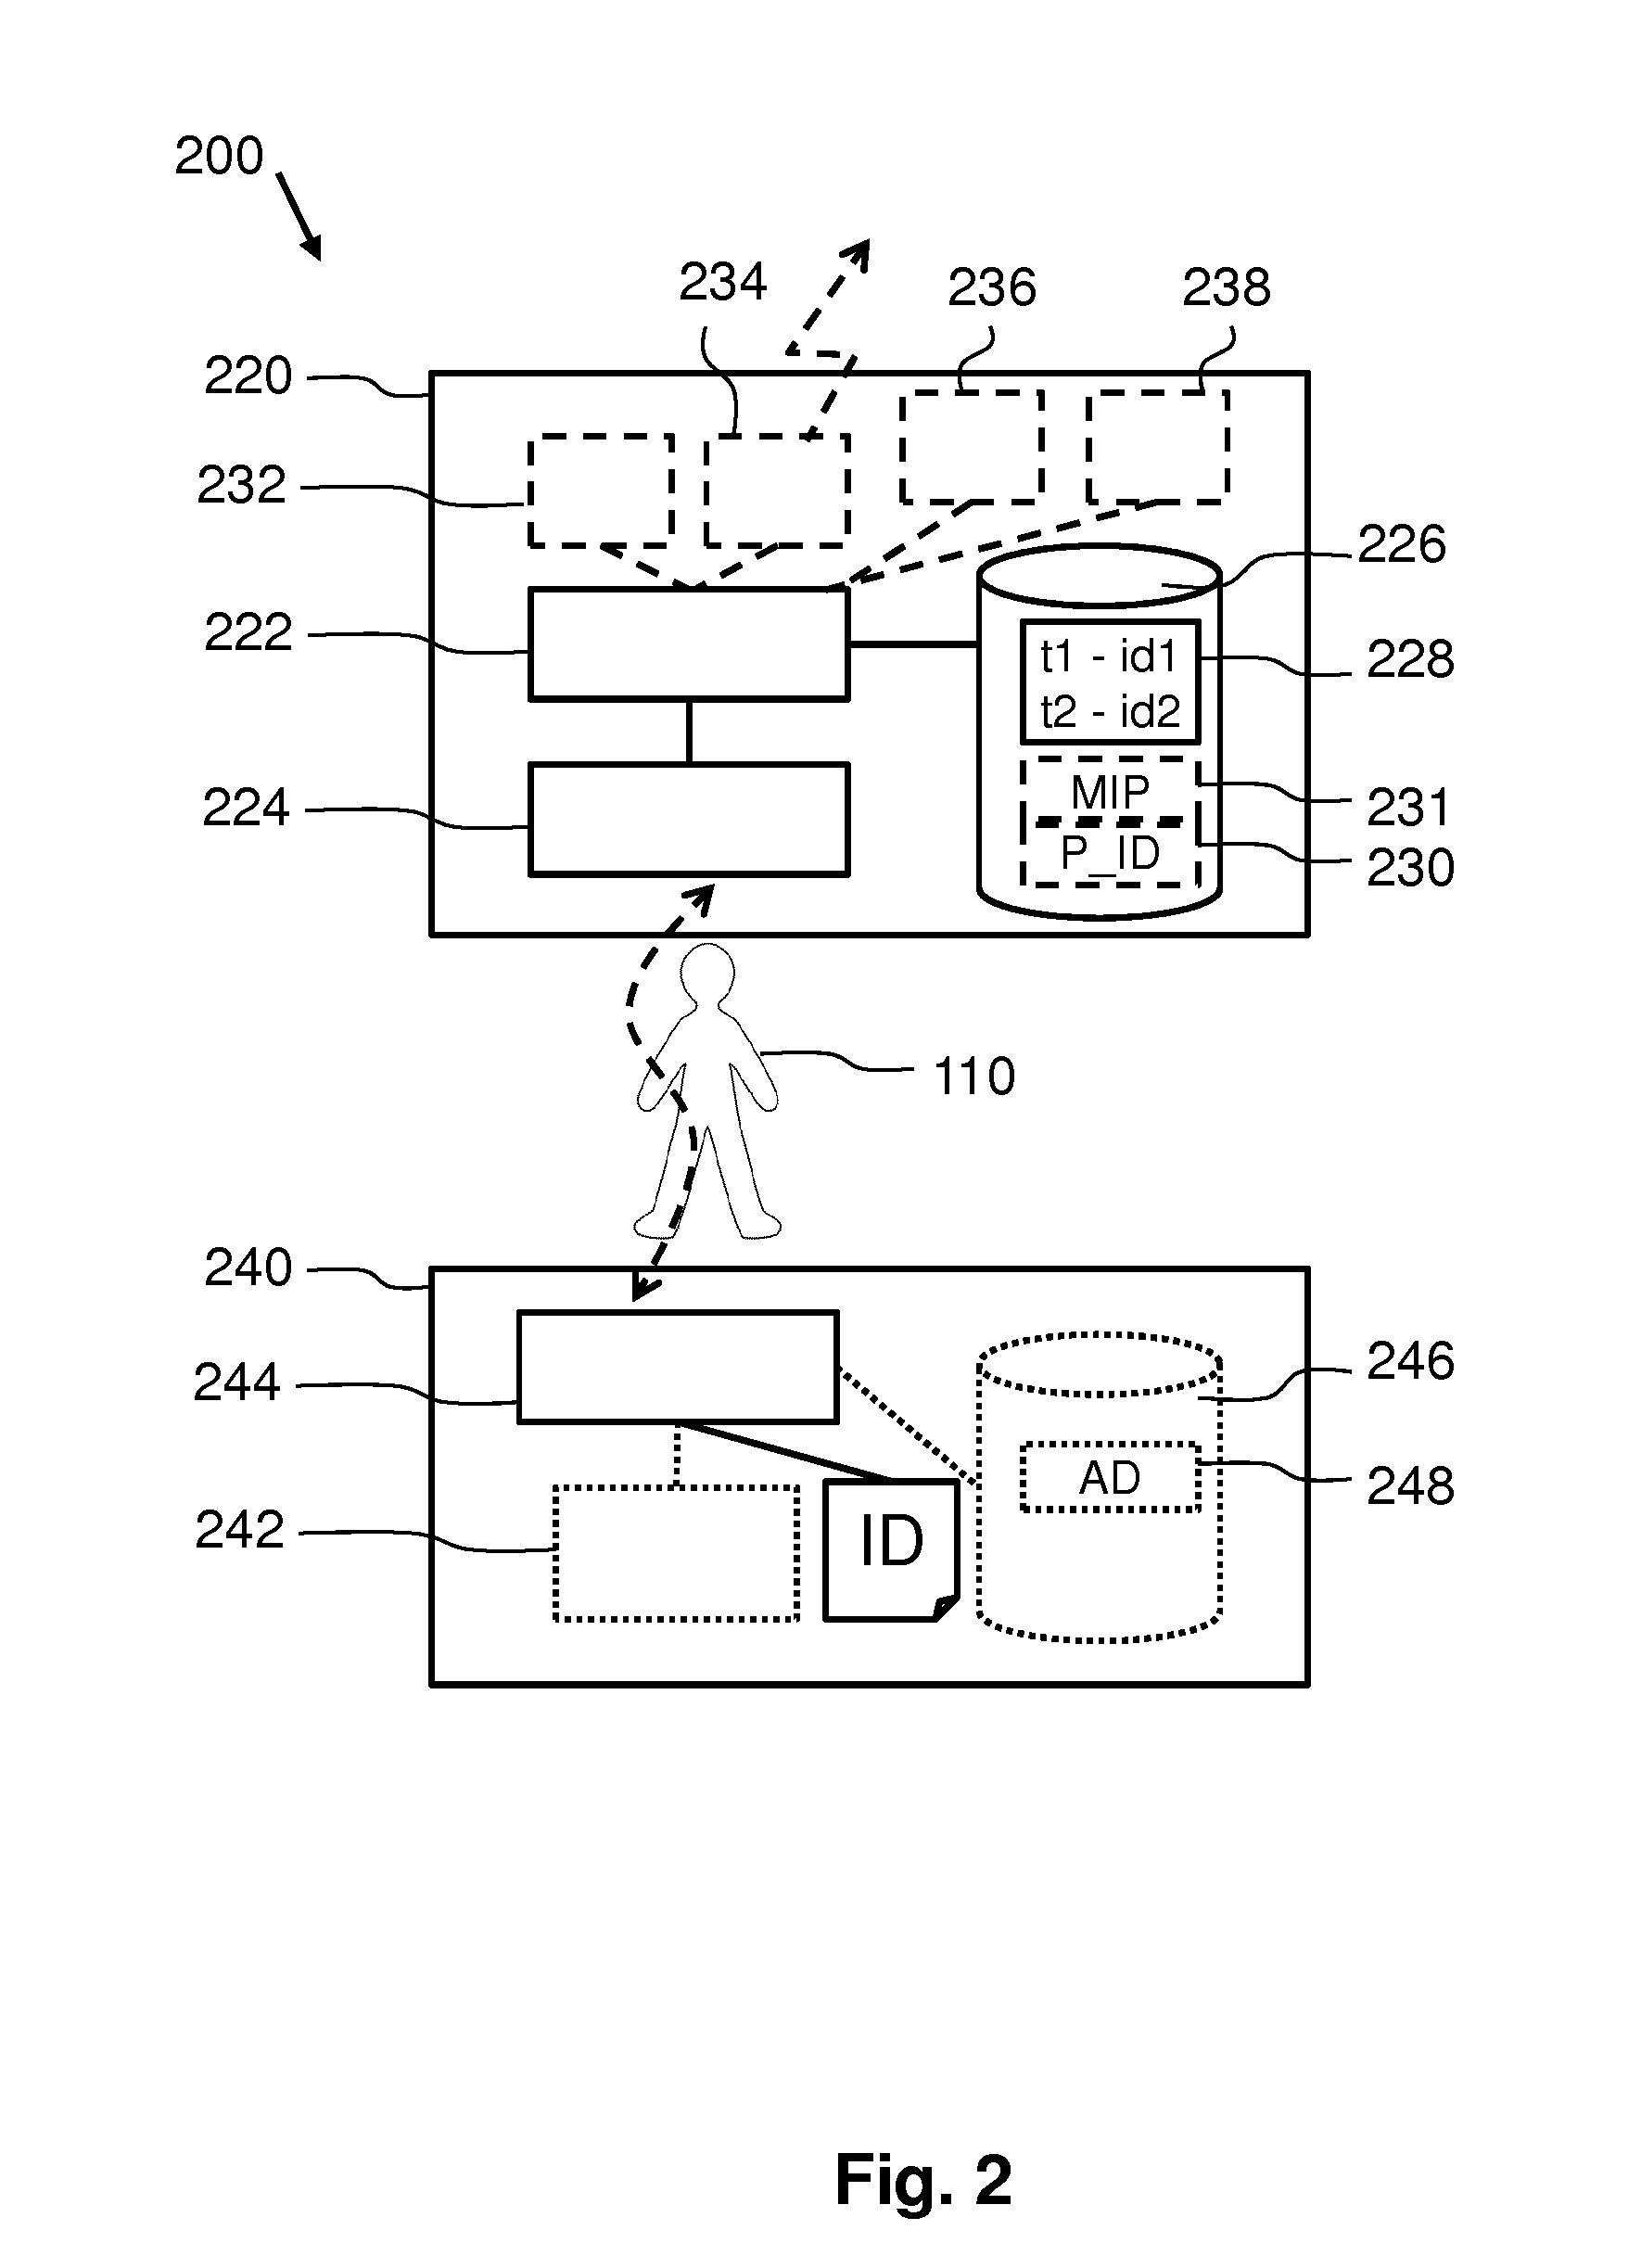 Logging system and a method of registering data for enabling monitoring of intake of a product by a user according to an intake plan